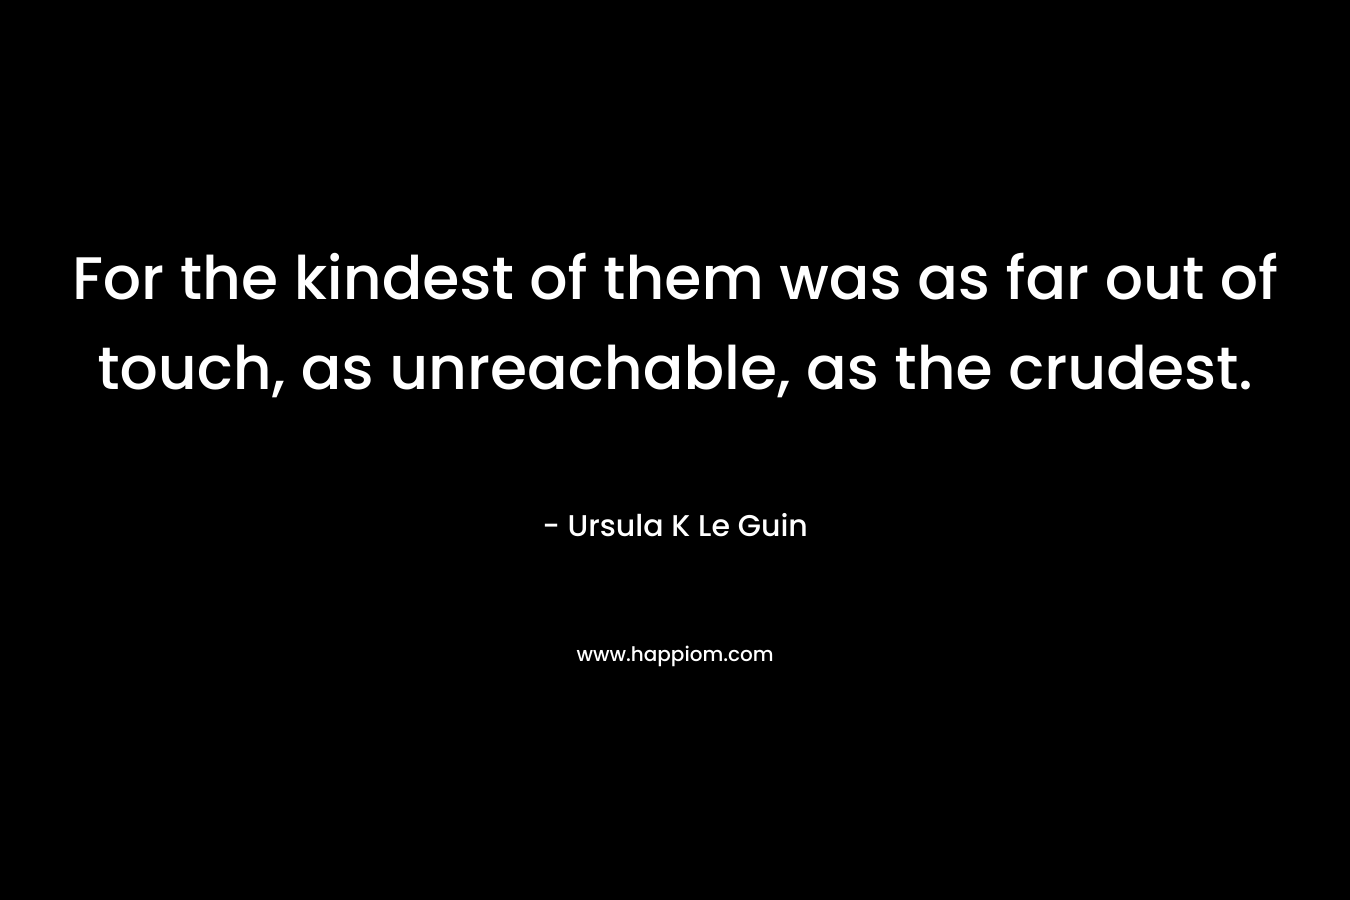 For the kindest of them was as far out of touch, as unreachable, as the crudest. – Ursula K Le Guin